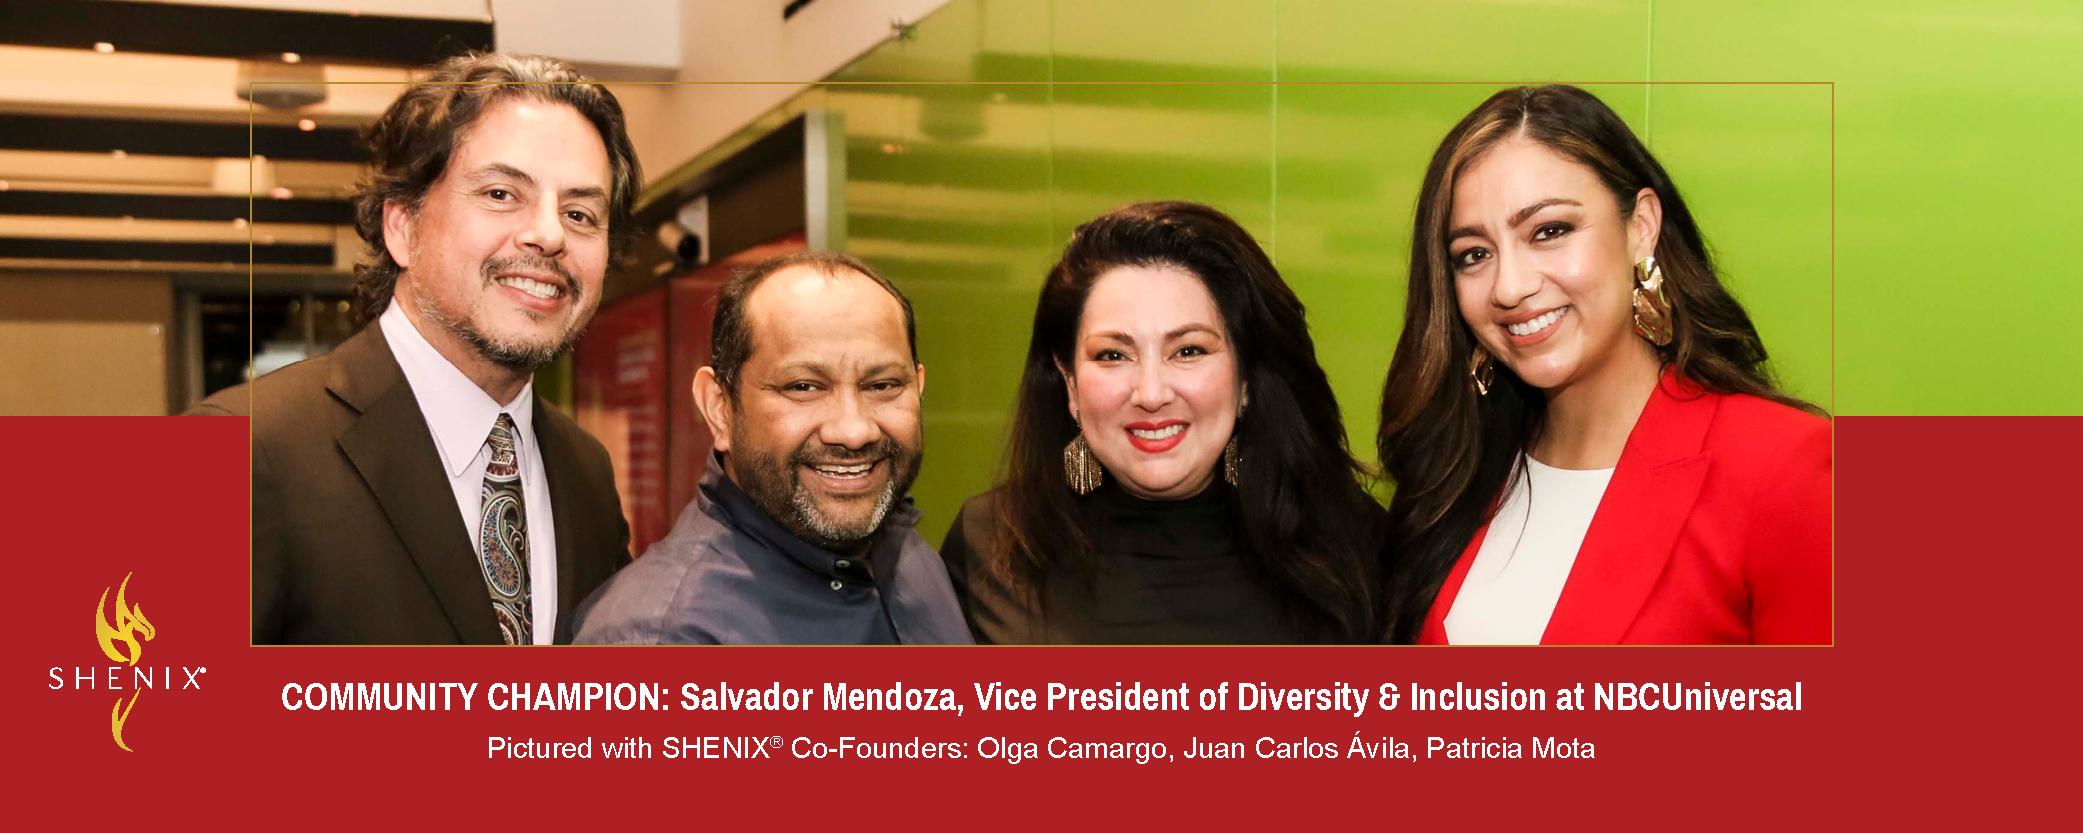 Community Champion: Salvador Mendoza, Vice President of Diversity & Inclusion at NBCUniversal